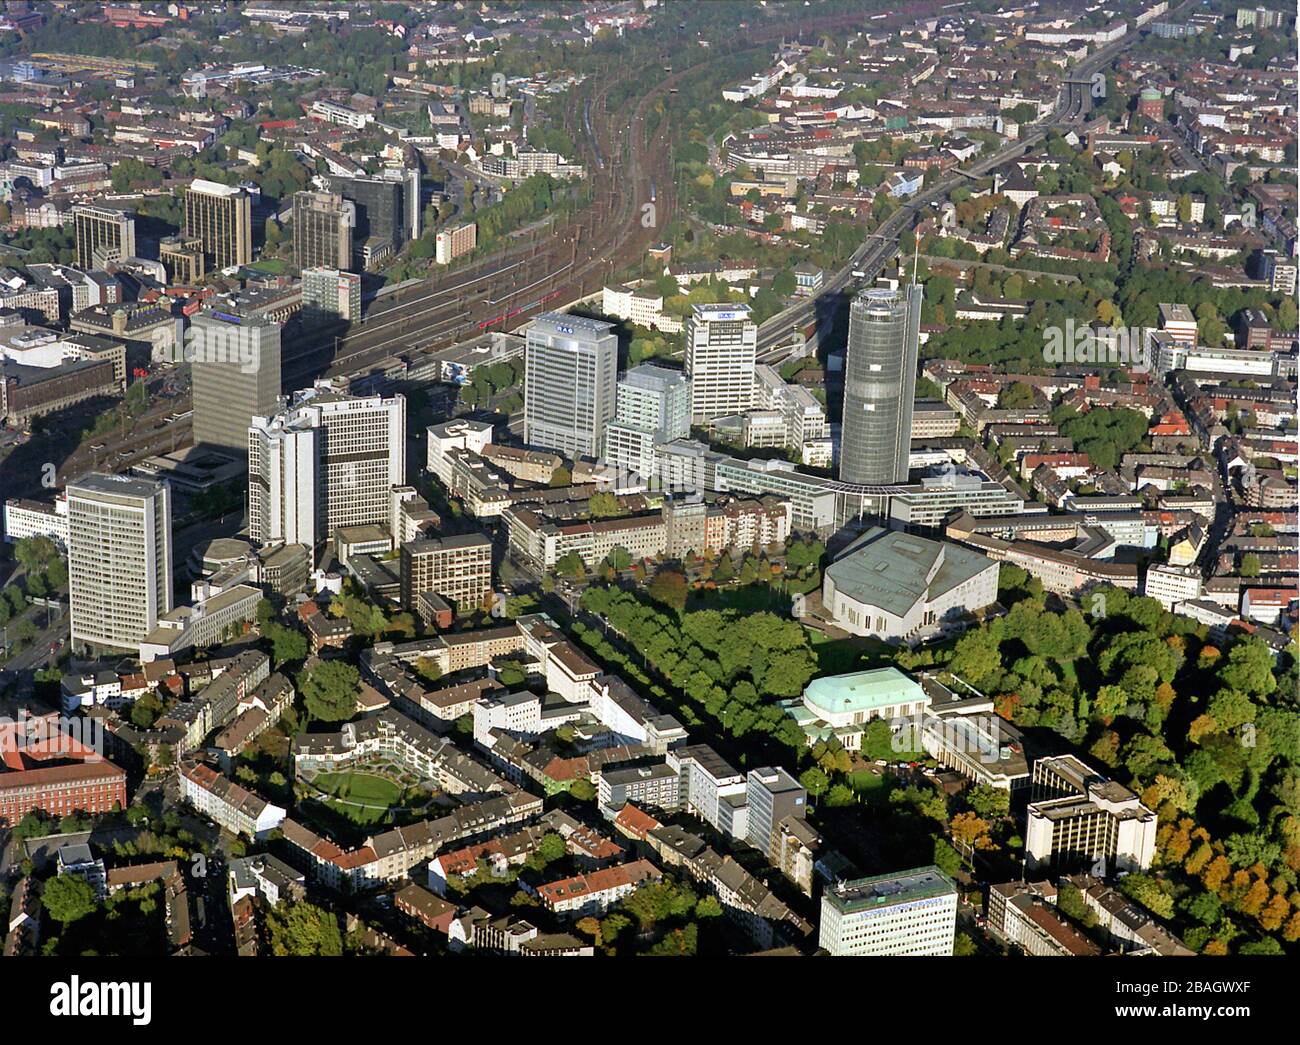 park Stadtgarten with Aalto theater and philharmonie, 18.10.1999, aerial view, Germany, North Rhine-Westphalia, Ruhr Area, Essen Stock Photo